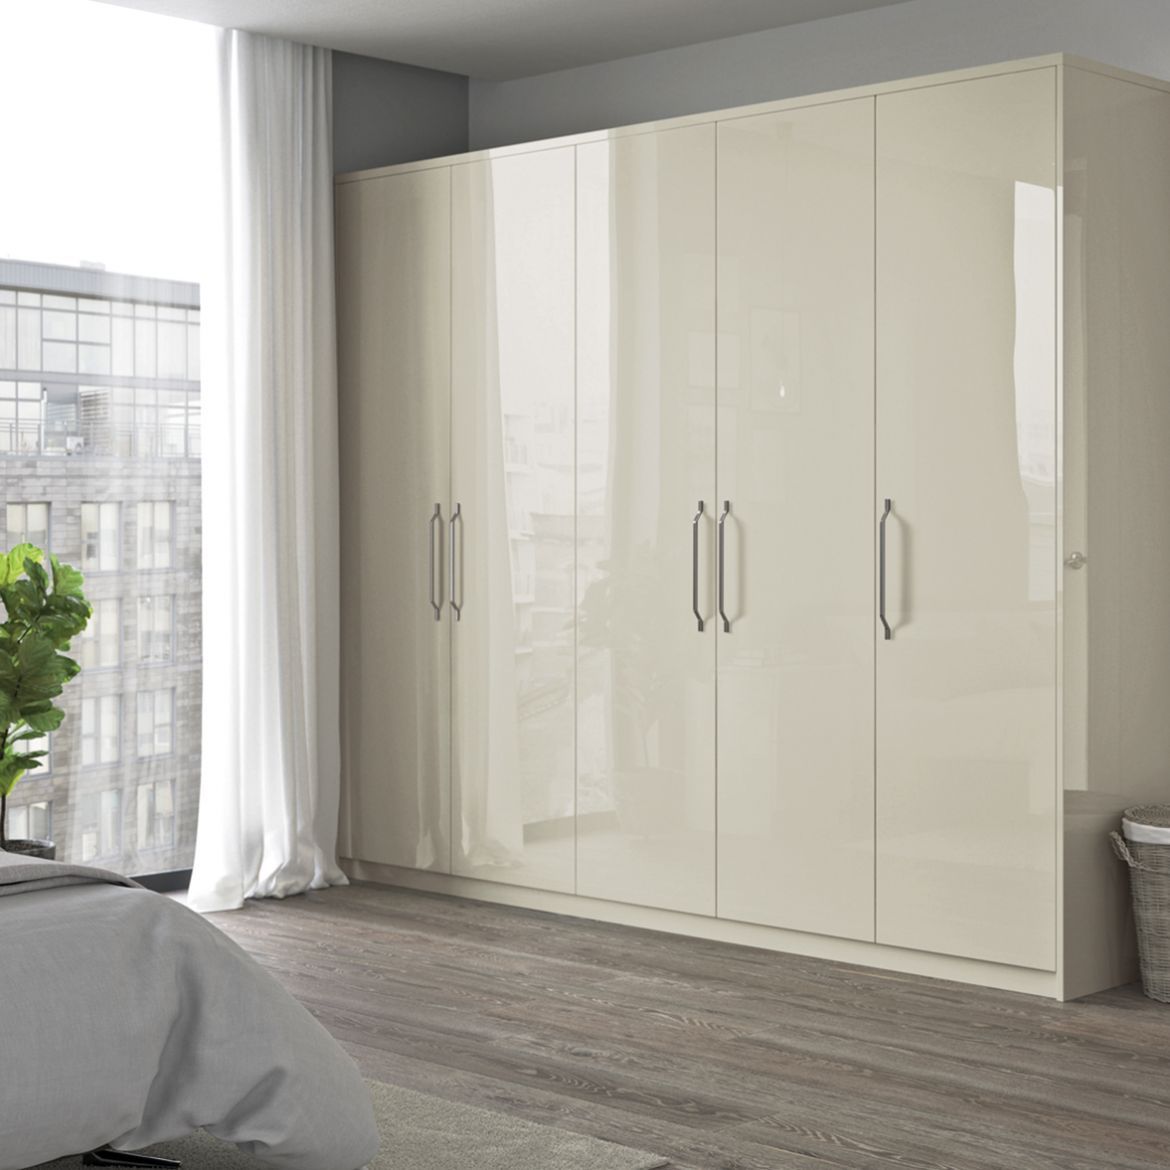 Reflections Wardrobe | Cash & Carry Kitchens Pertaining To High Gloss Wardrobes (Photo 7 of 15)